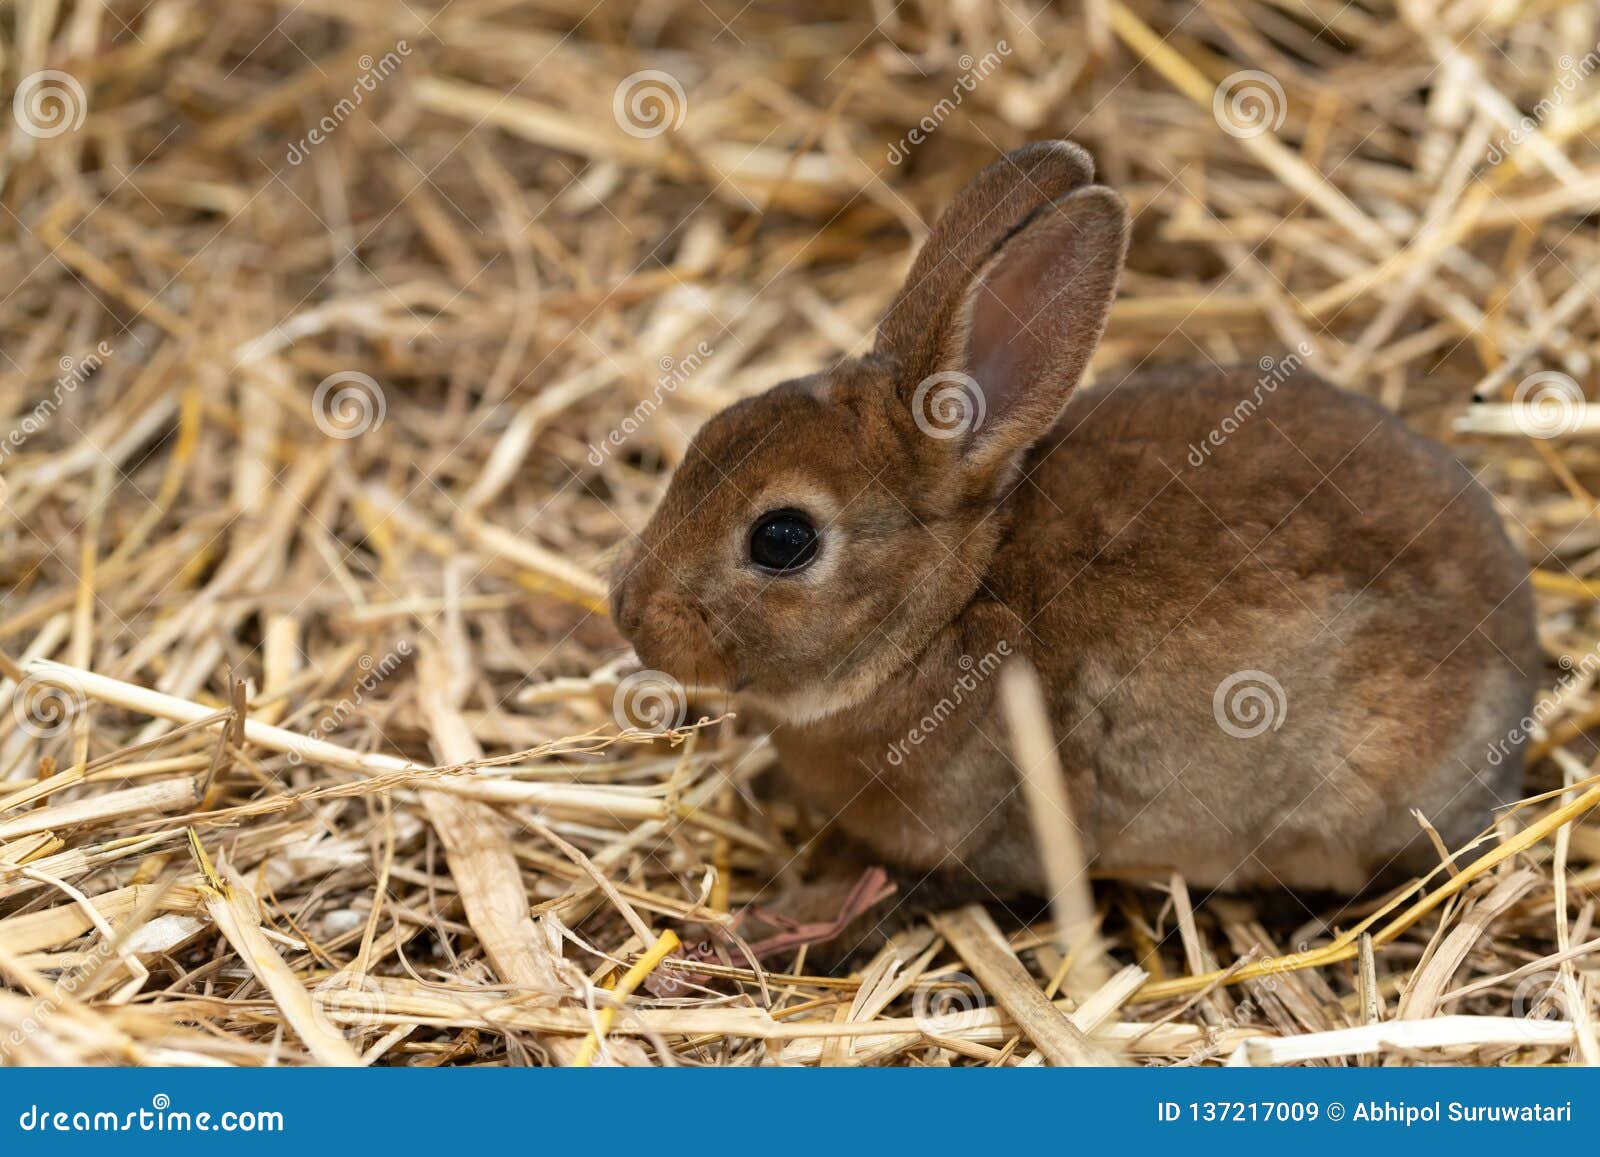 mini rex is a breed of domestic rabbit that was created in 1984 in florida. the rex mutation, derived in france in the 19th centur